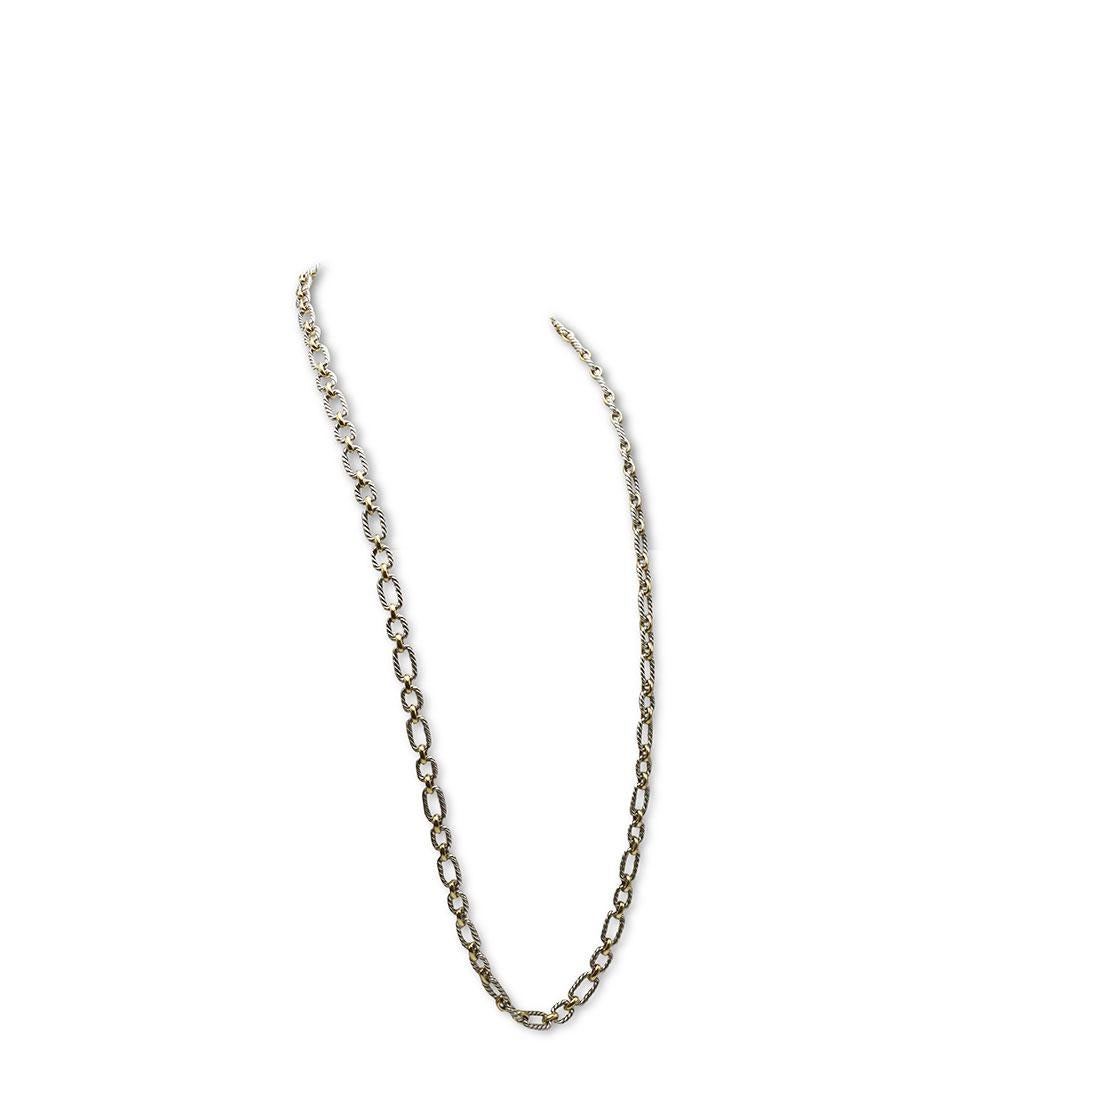 Authentic David Yurman cushion link necklace crafted in sterling silver and 18 karat bonded yellow gold. The necklace is comprised of oval links inspired by David Yurman's classic cable design. Features hidden blue sapphires on each end of the